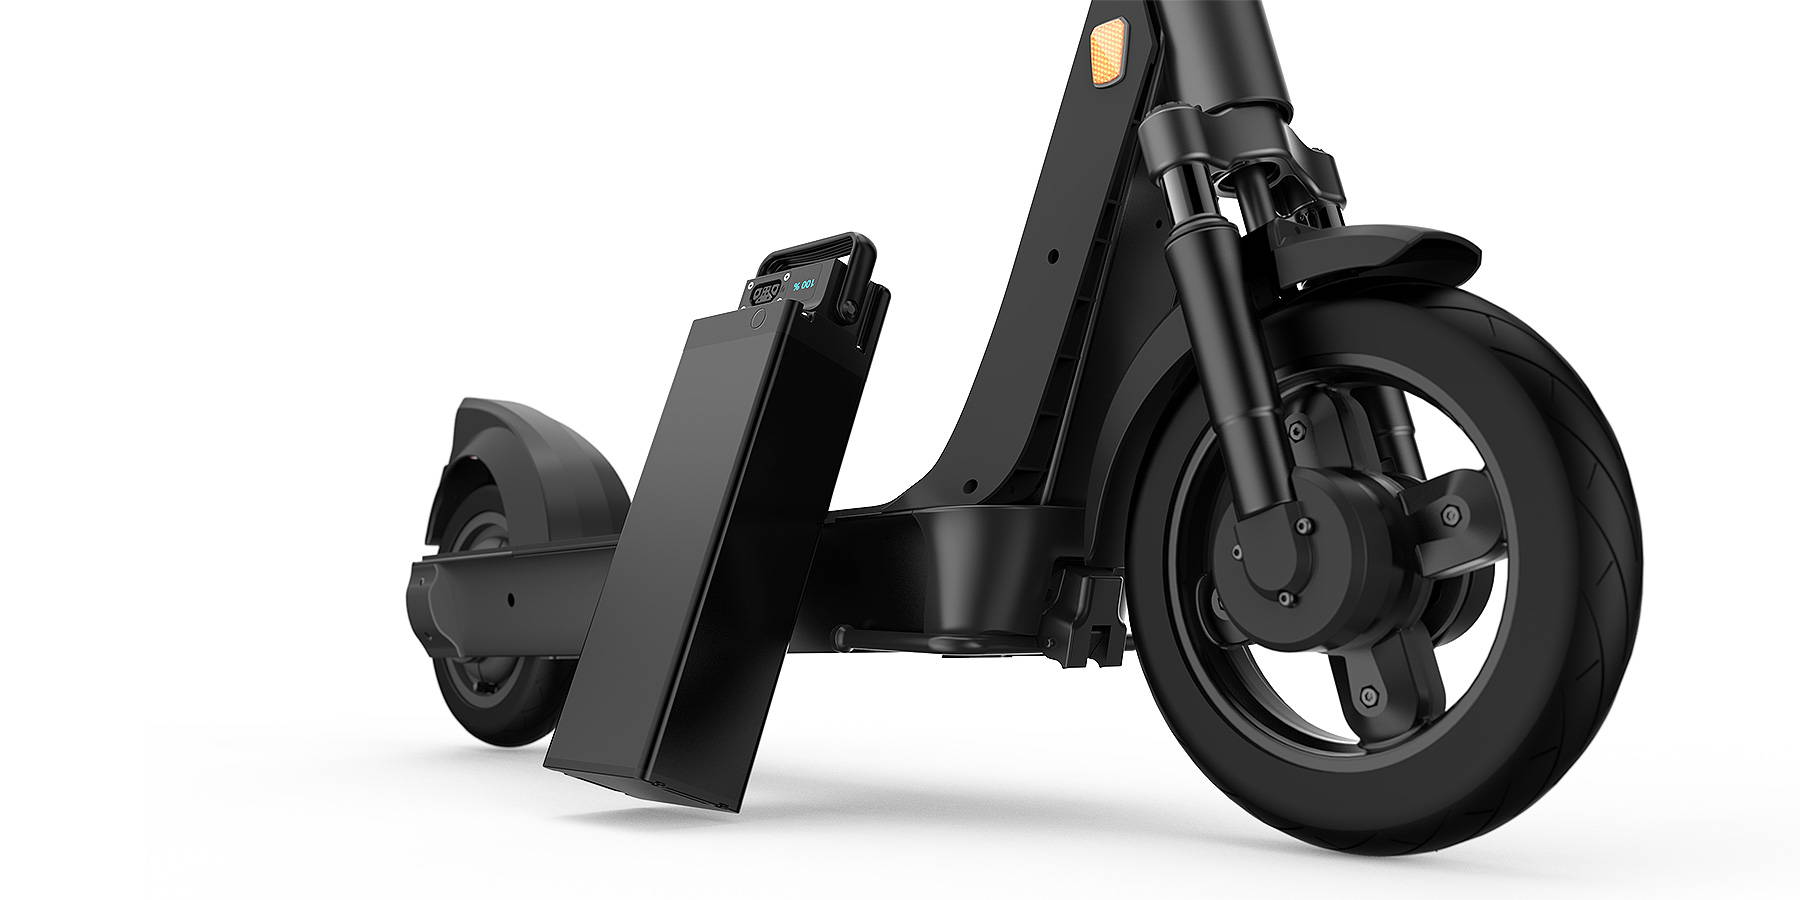 Okai ES400A - Top Electric Sharing Scooter - Swappable Battery E- Scooter